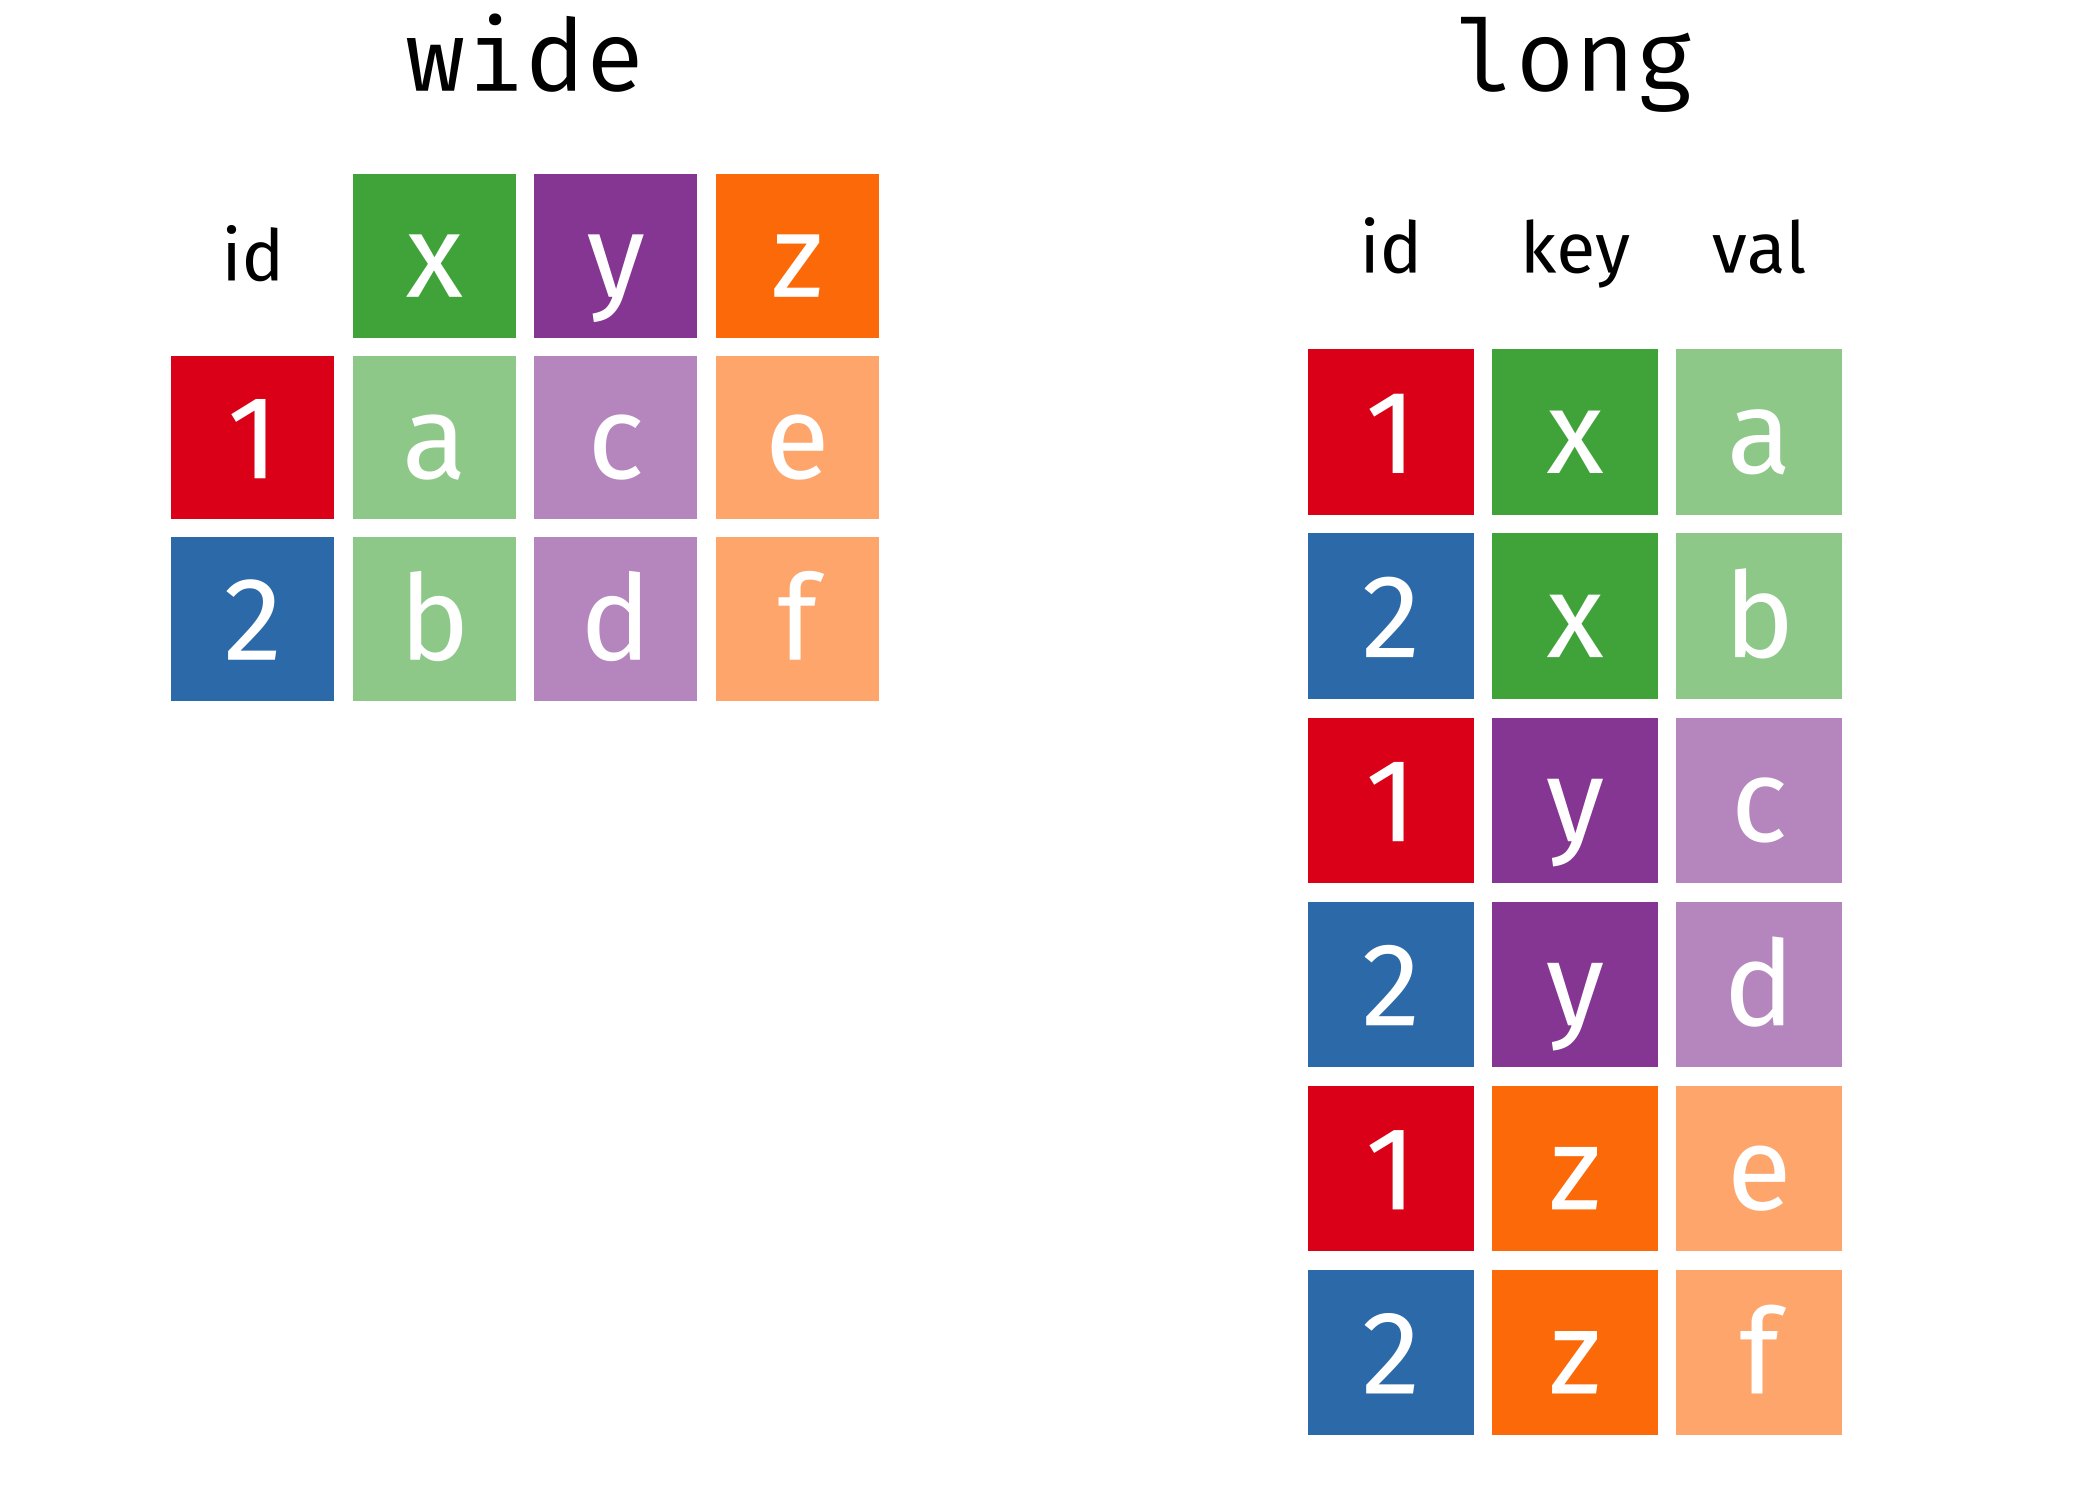 Long versus wide-format for data tables (illustration by Garrick Aden-Buie).